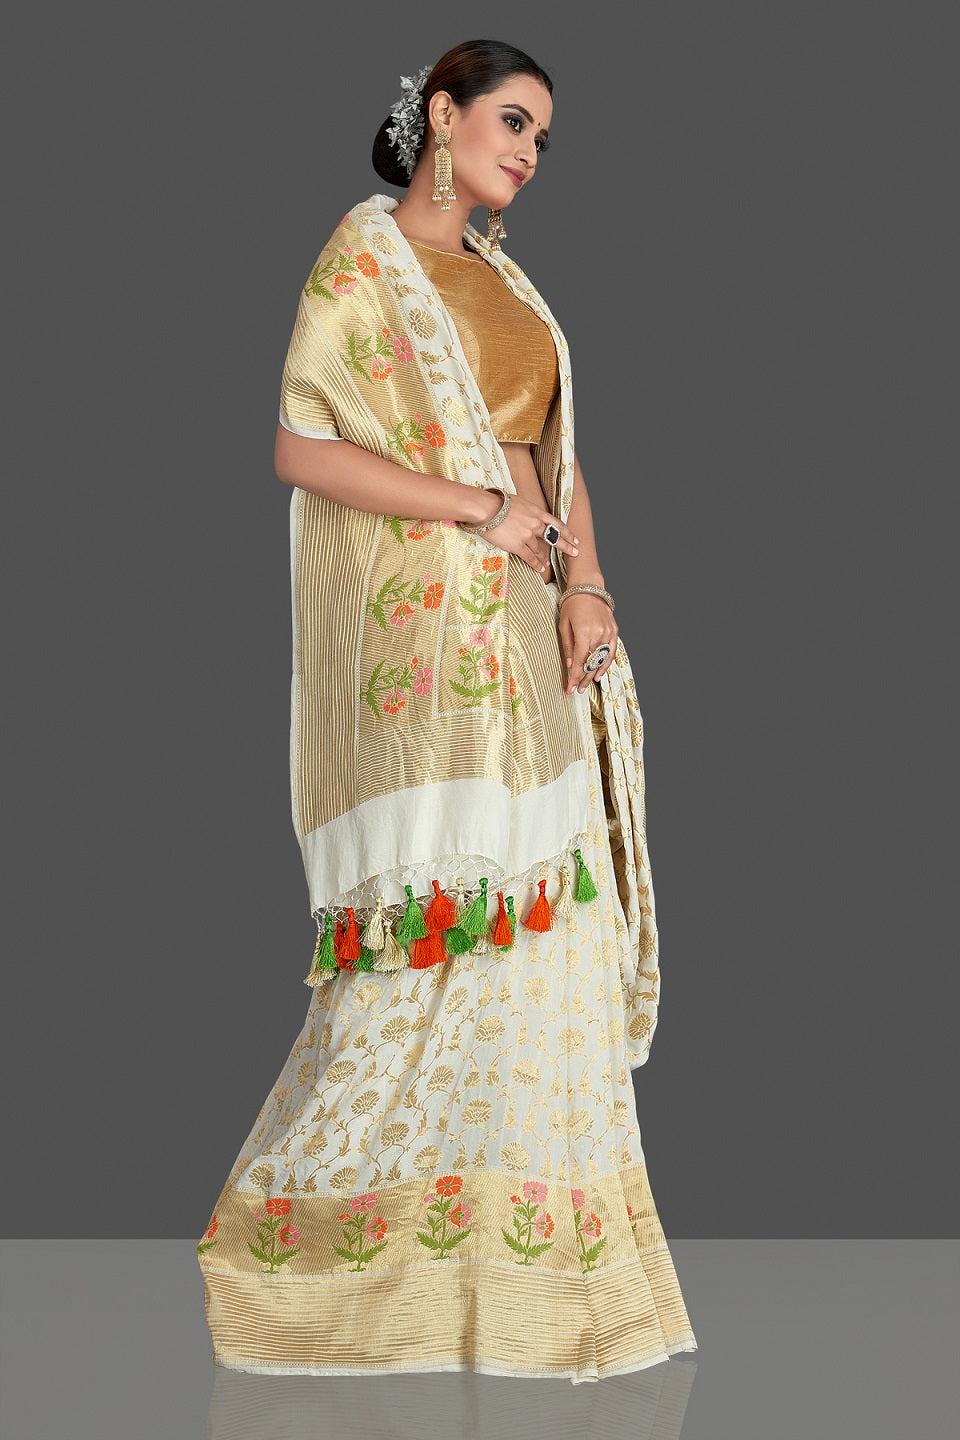 Buy beautiful off-white georgette Banarasi saree online in USA with zari minakari buta on golden zari border. Elevate your traditional style with beautiful Banarasi sarees, designer sarees, pure silk sarees, handwoven saris from Pure Elegance Indian saree store in USA.-side